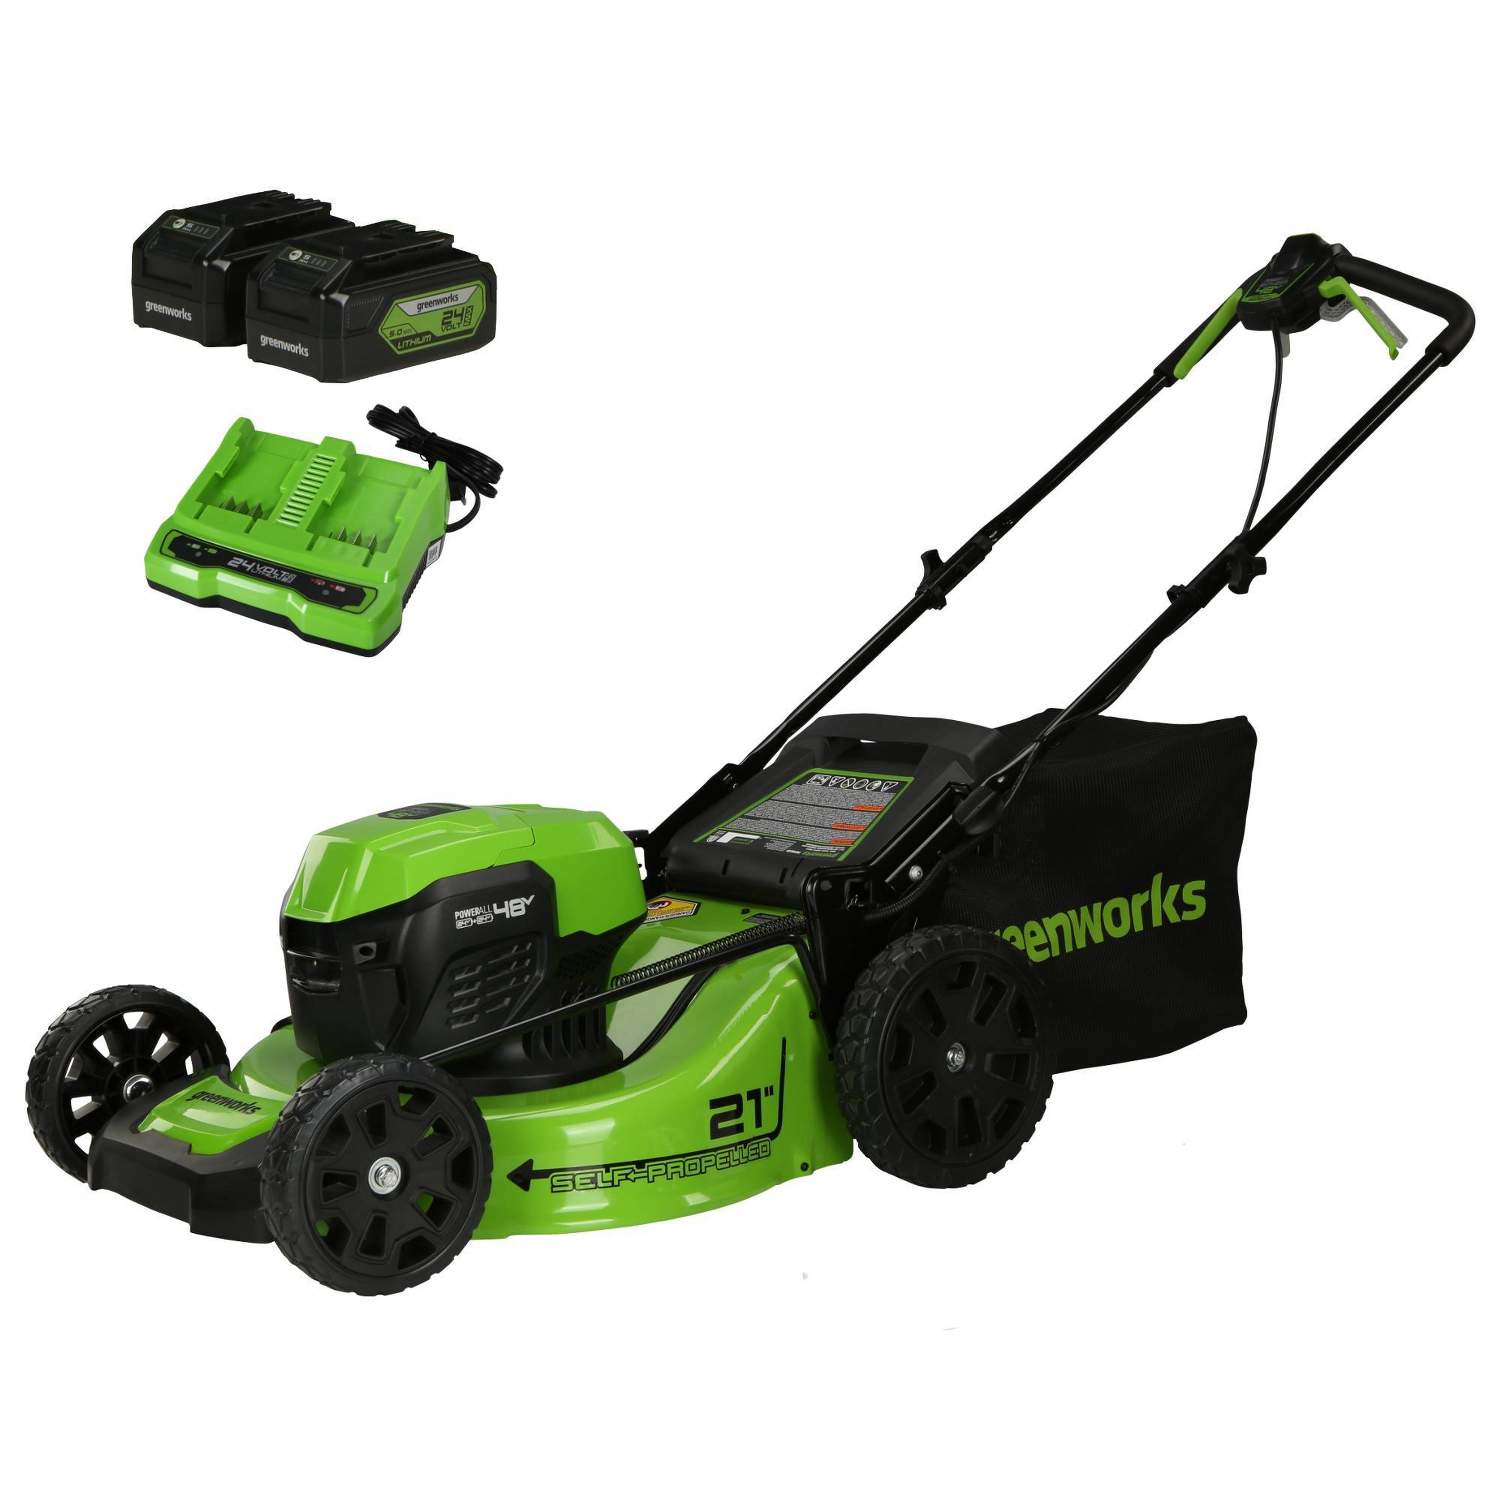 Greenworks POWERALL 21" 24V 5Ah Cordless Brushless Self-Propelled Mower Kit with 2 USB Batteries and Dual Port Rapid Charger